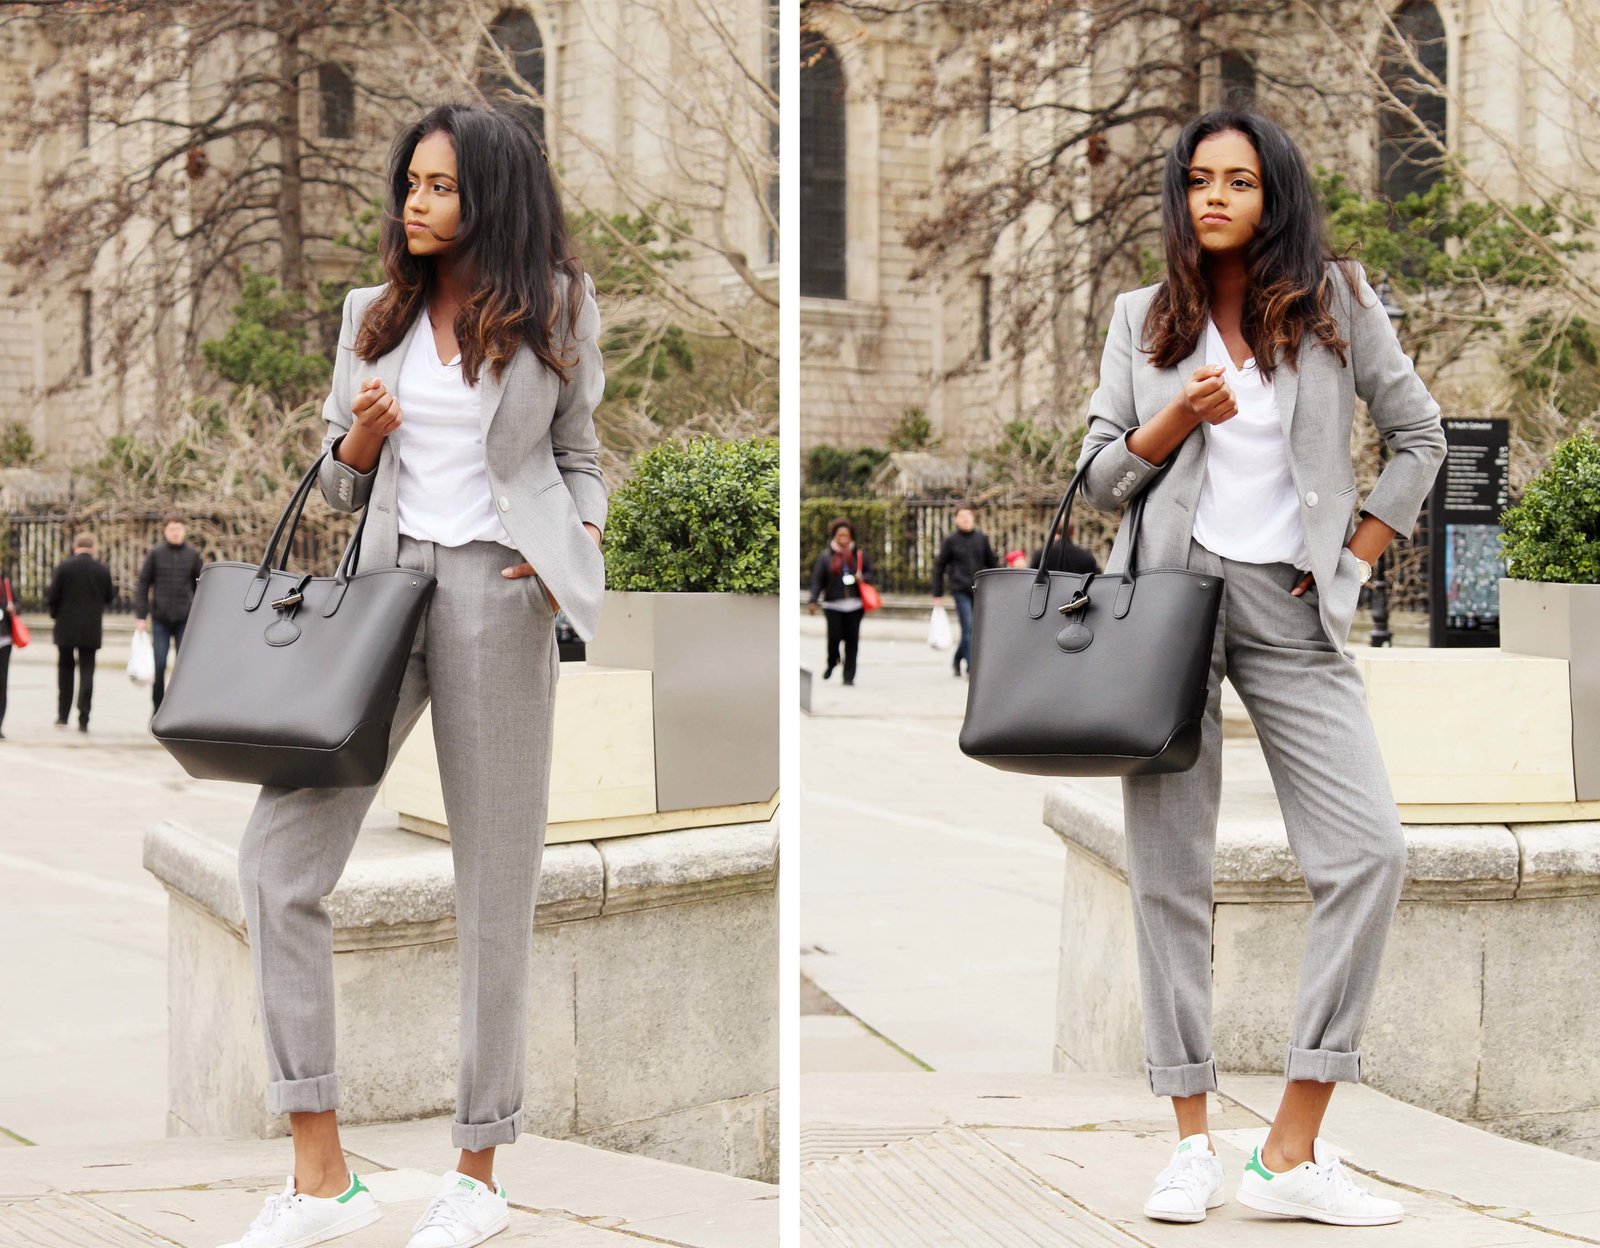 Two pictures of Sachini wearing a grey suit and white Adidas sneakers holding a black bag